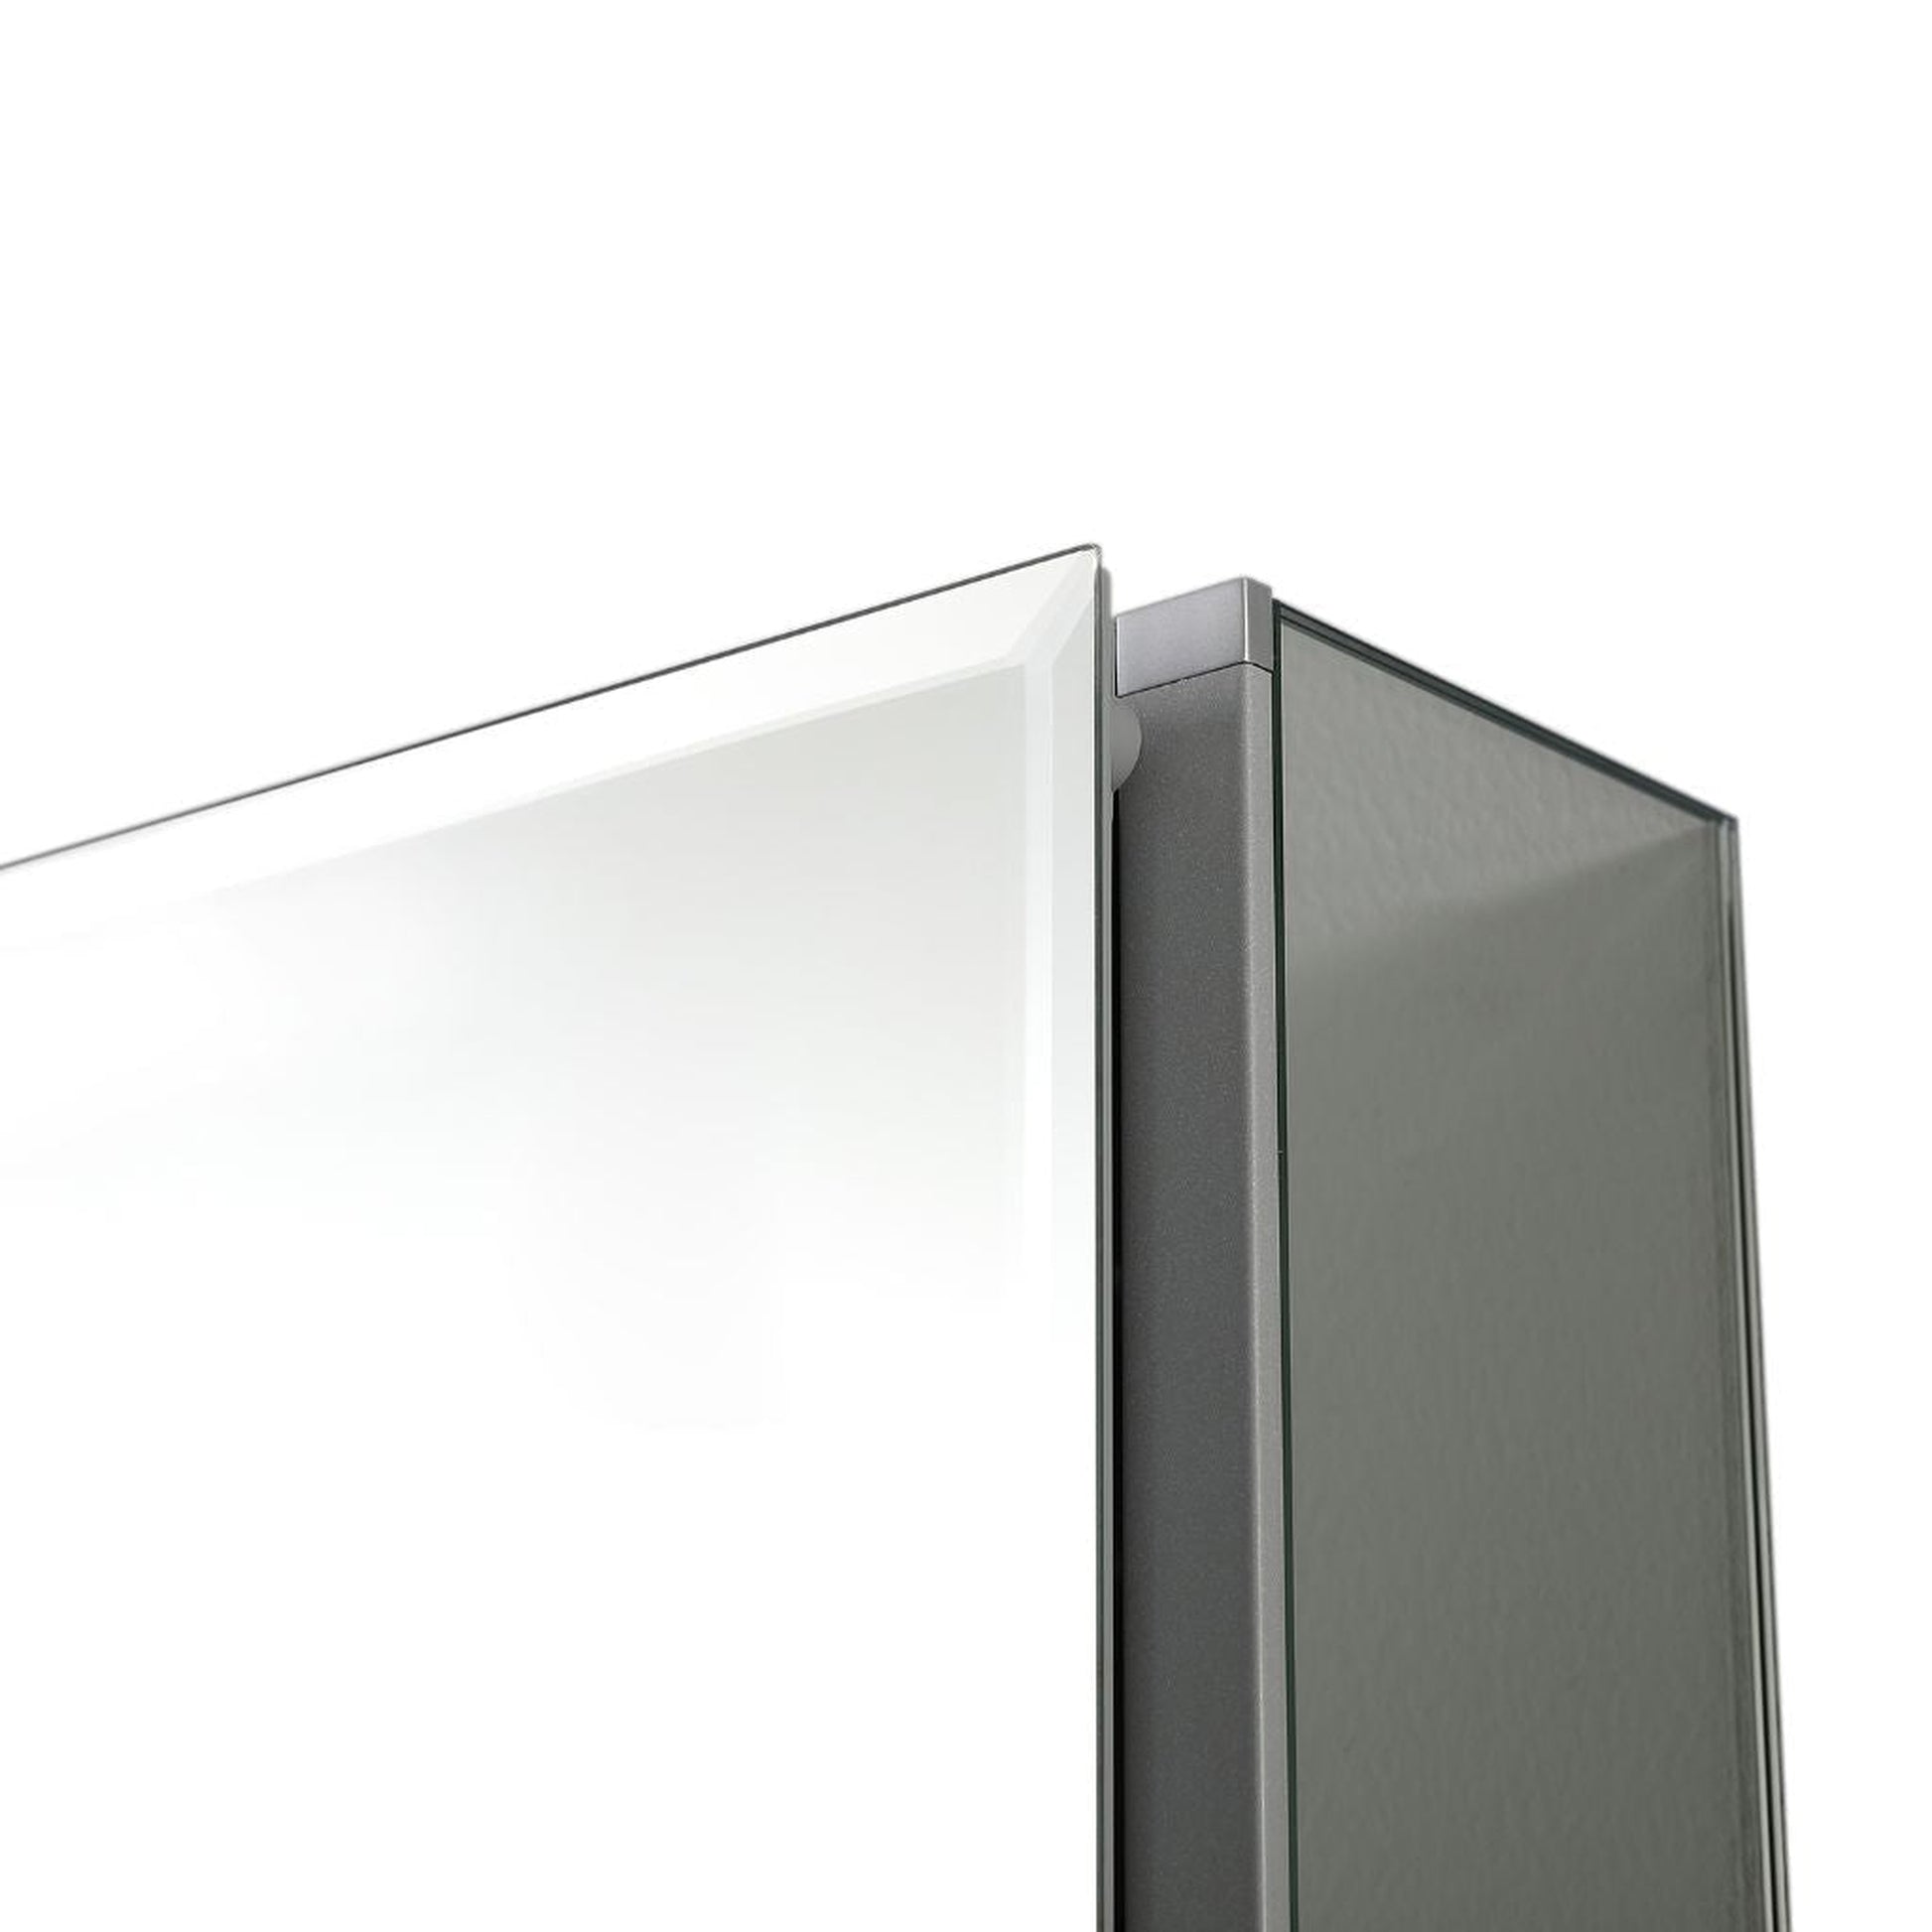 Blossom MC8 16" x 20" Recessed or Surface Mount Left or Right-Hand Swing Door Aluminum Medicine Cabinet With Mirror, Adjustable Hinges and Adjustable Glass Shelves